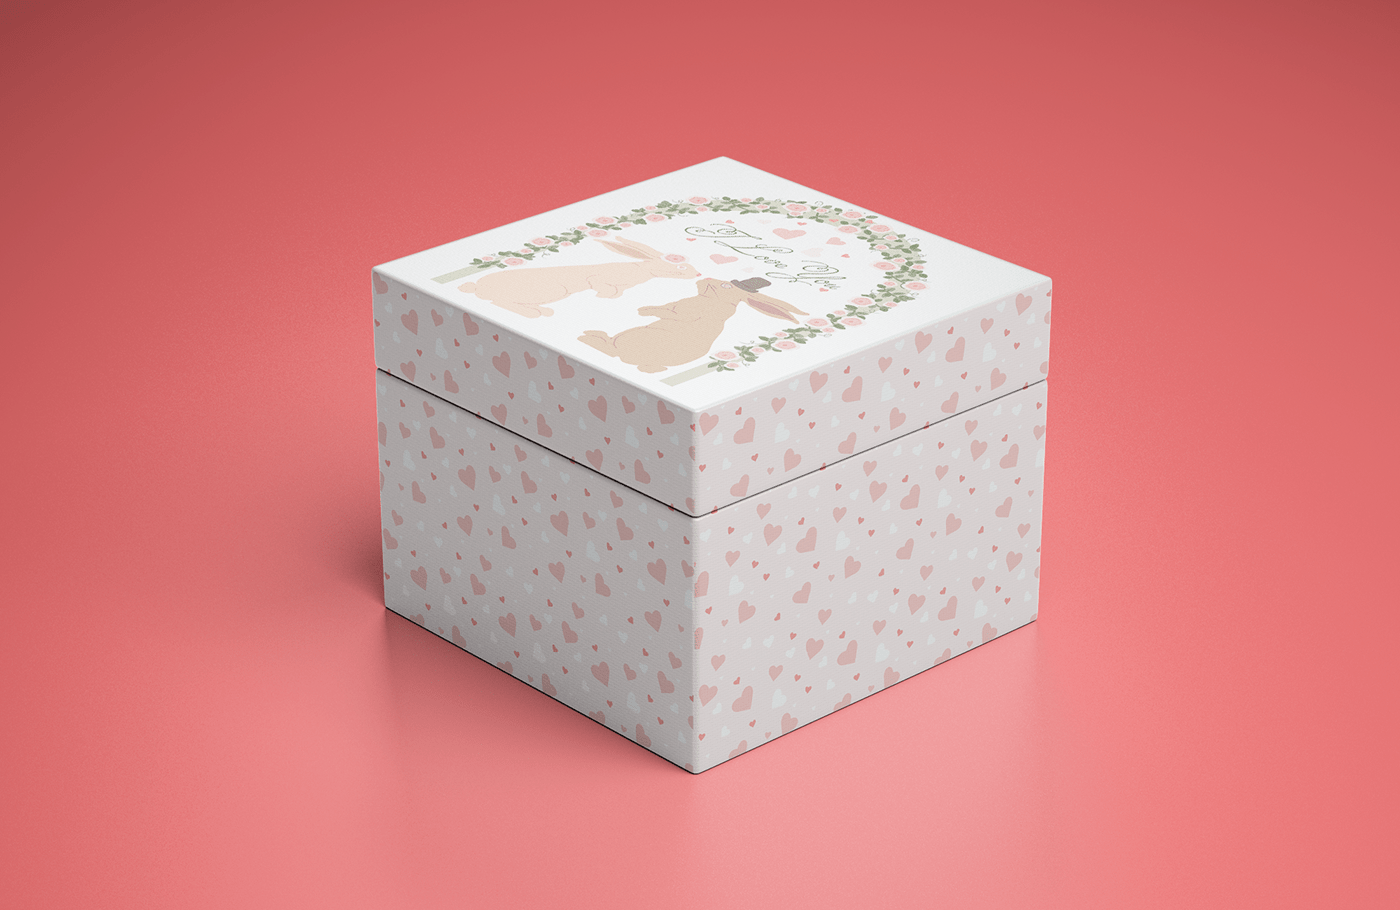 gift packaging design heart Love pink romantic Valentine's Day valentines